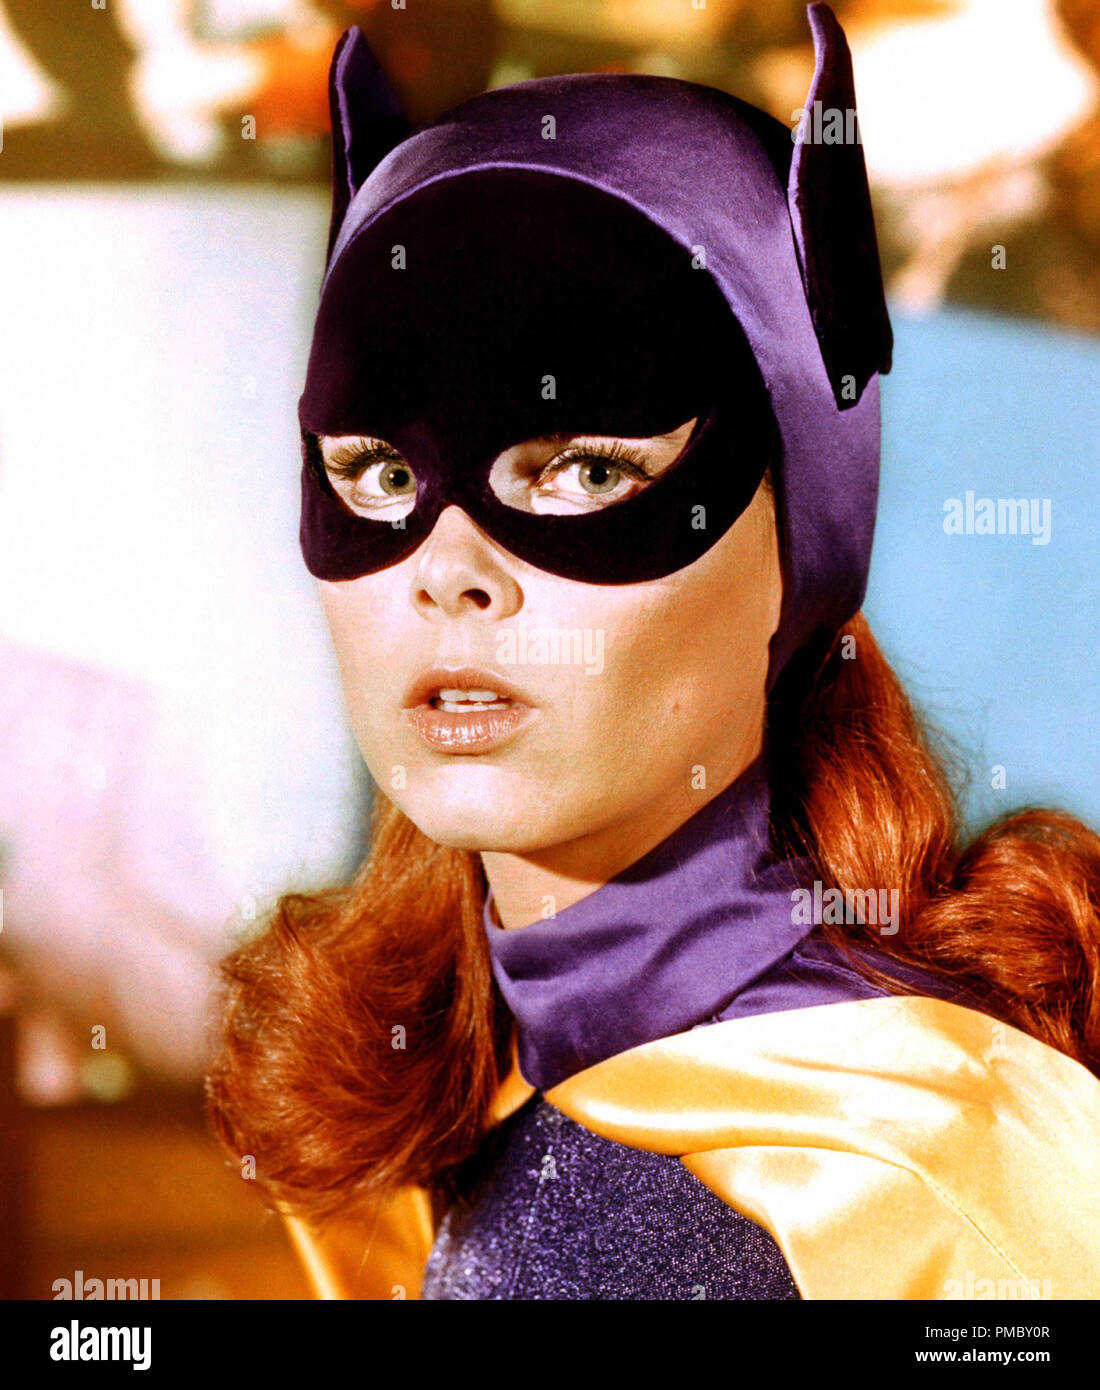 52 Yvonne Craig Batgirl Photos & High Res Pictures - Getty Images